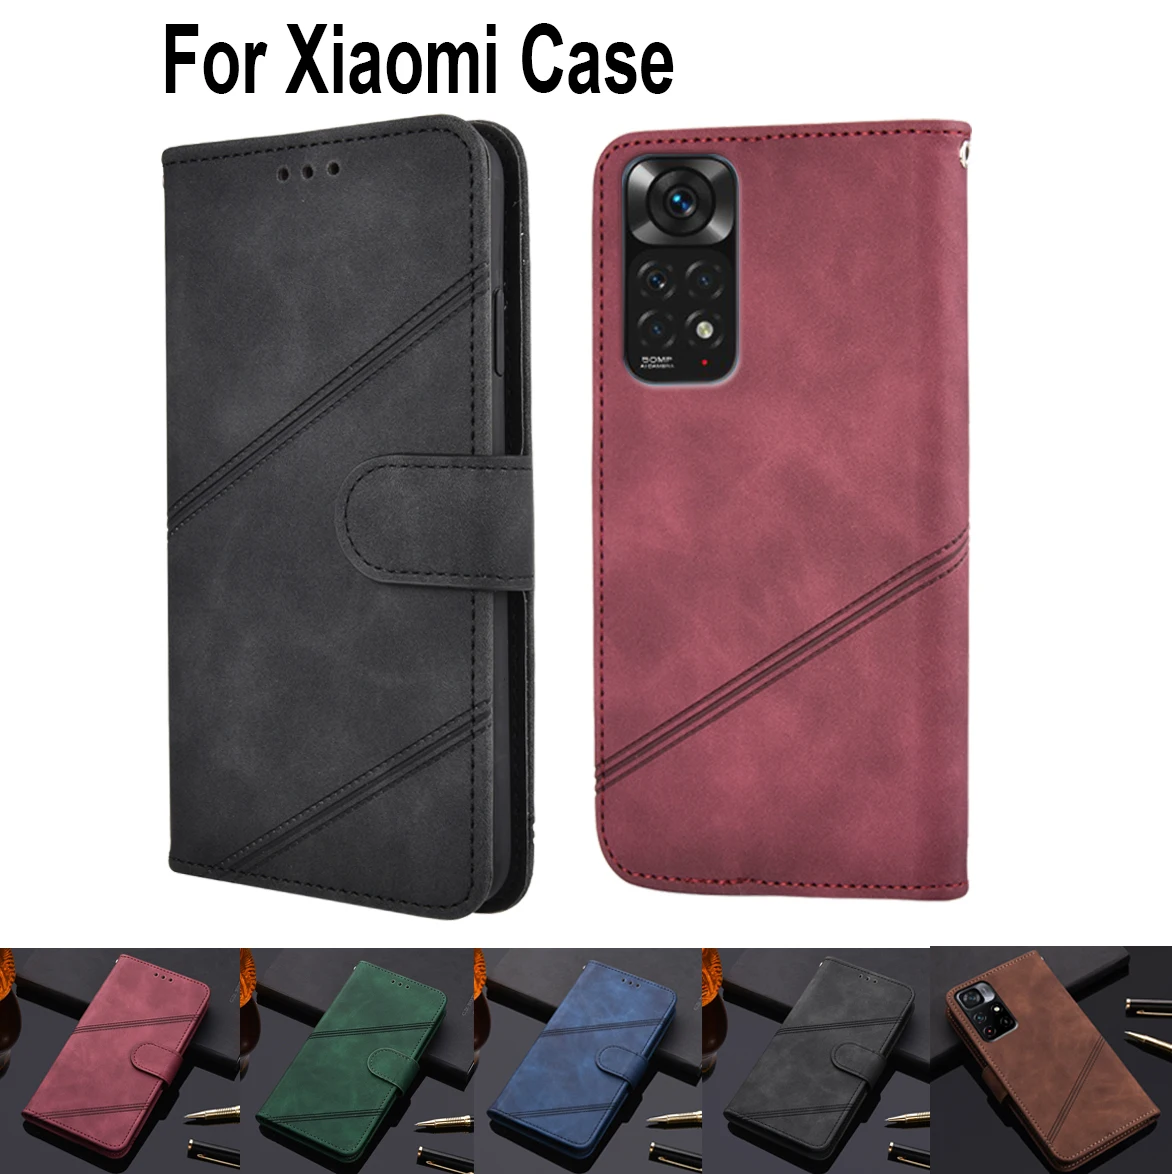 Luxury Wallet Flip Cover For Xiaomi A2 A3 Lite A1 Mix 2 2S 3 4 Play F1 Note 3 2 Protective Phone Case Leather Shell Coque Capa